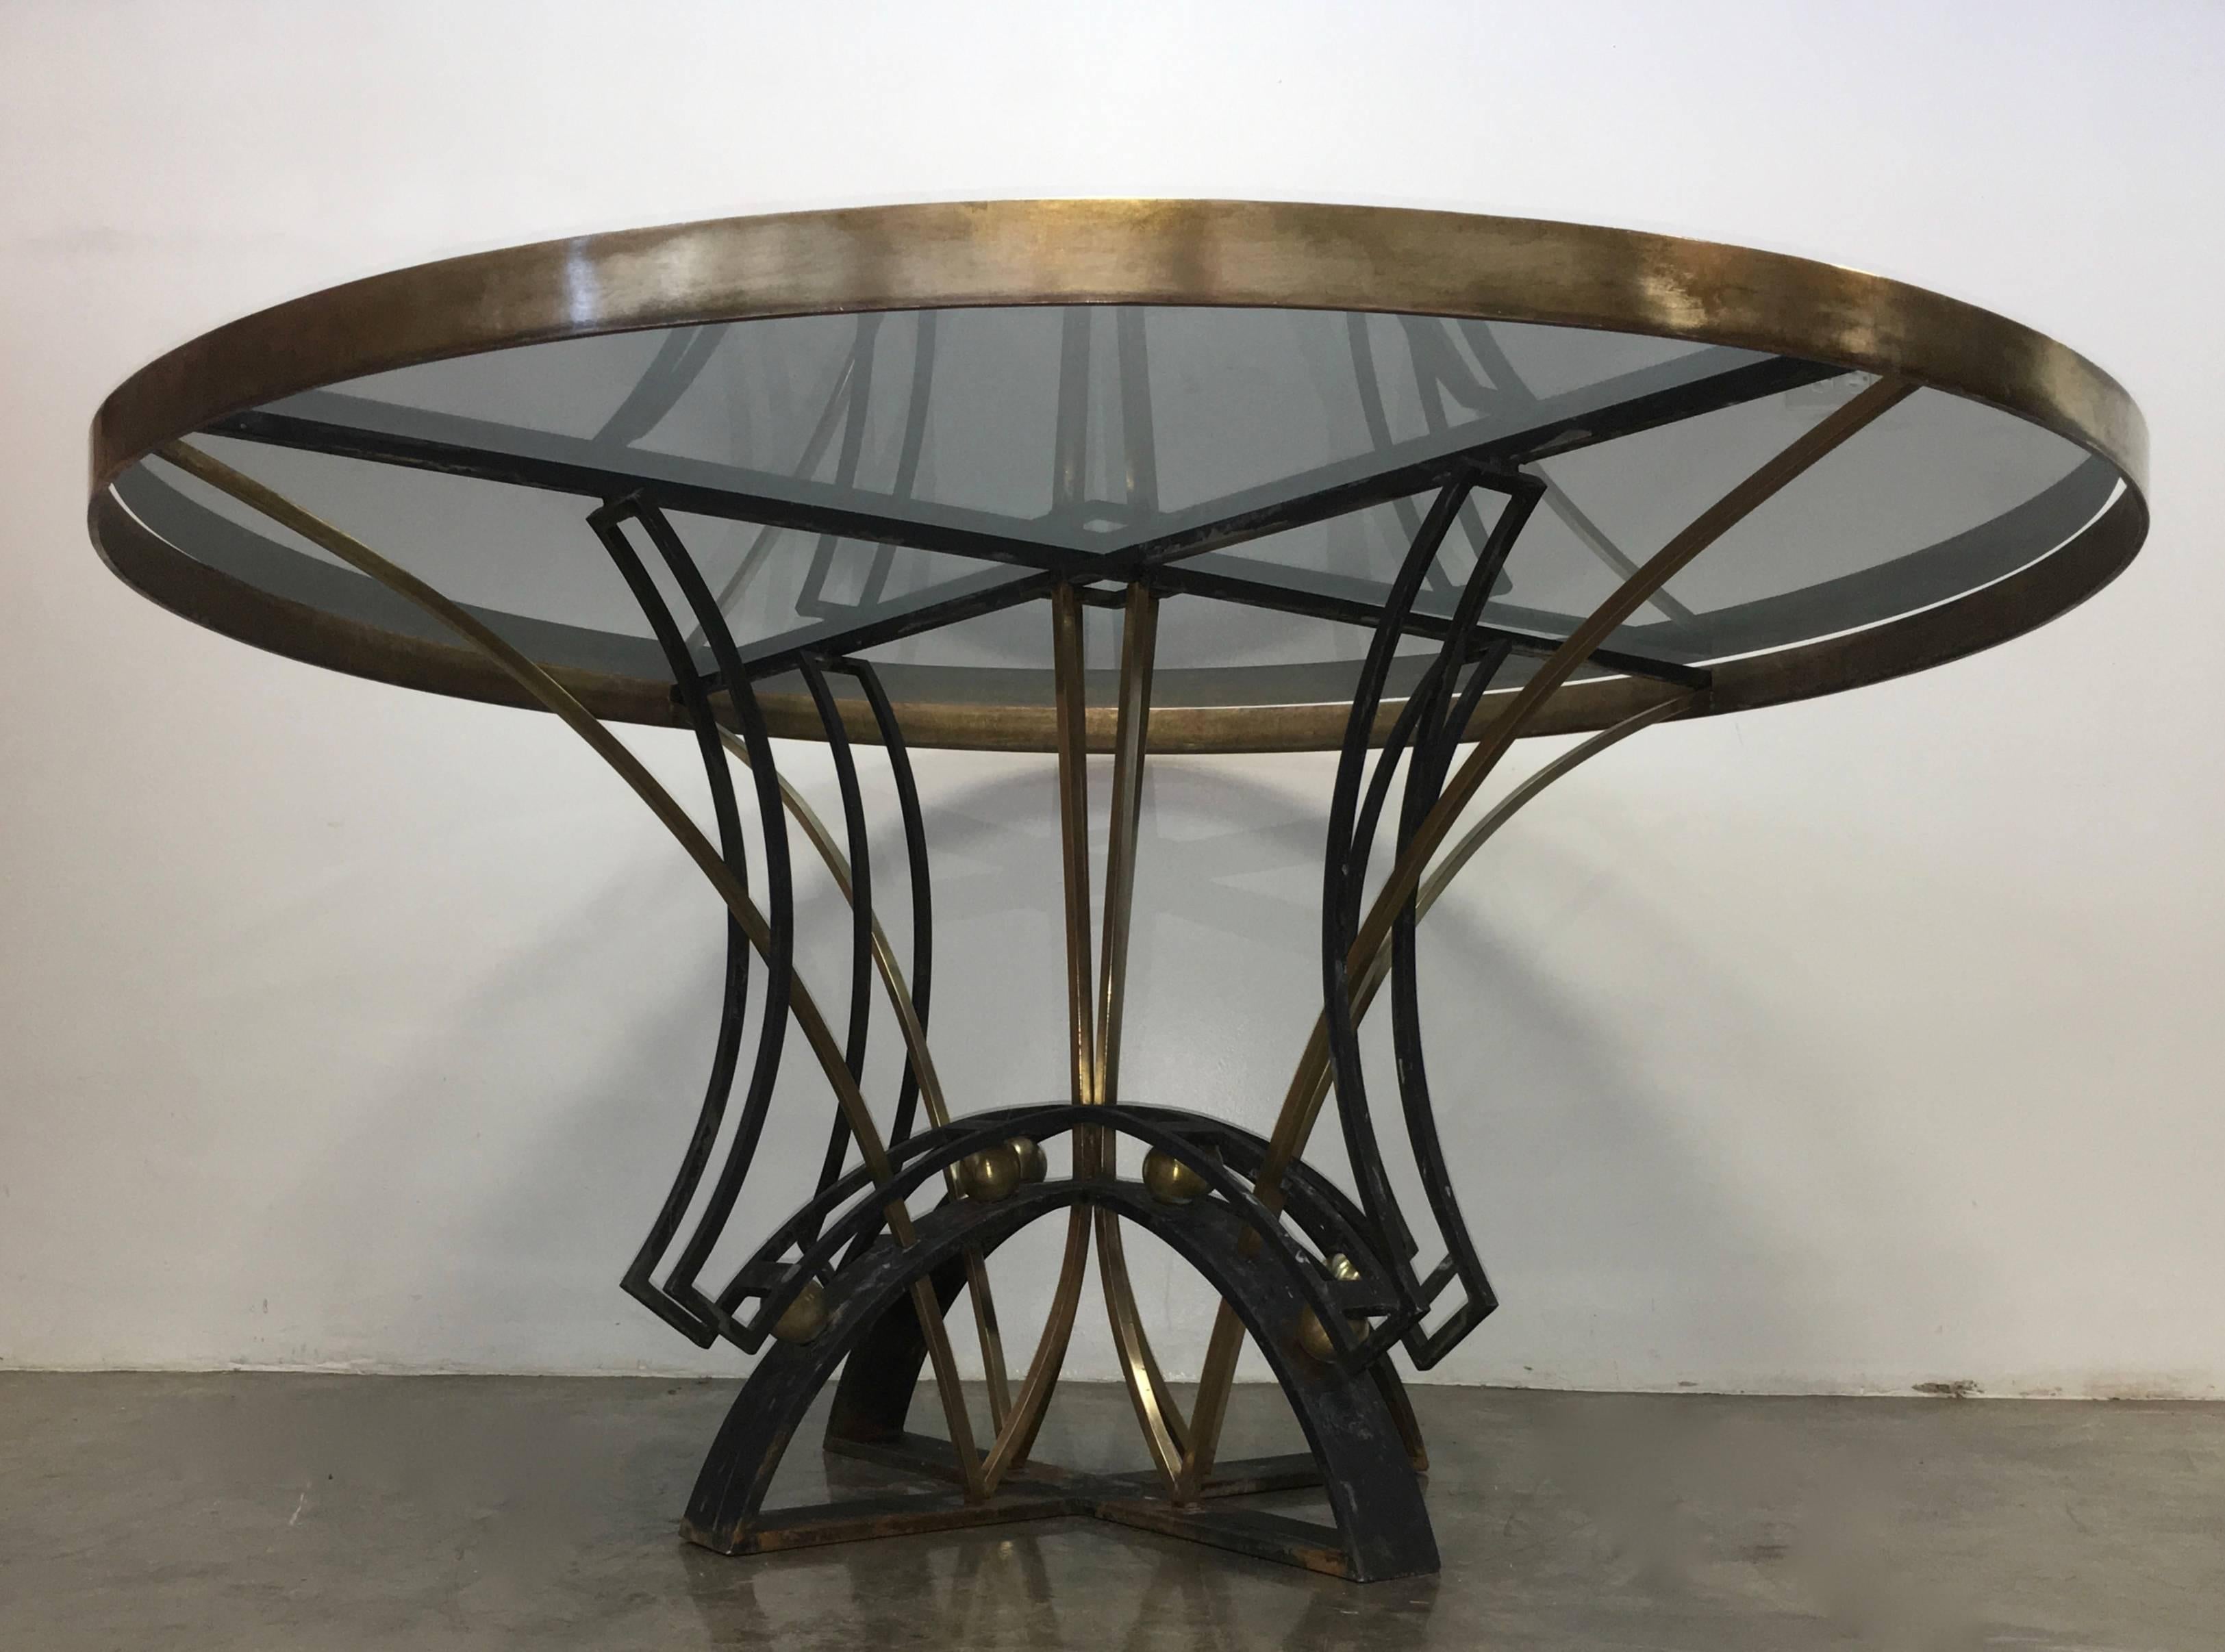 Mexican Superb Iron and Brass Round Dining Table by Arturo Pani, Mexico City circa 1950s For Sale